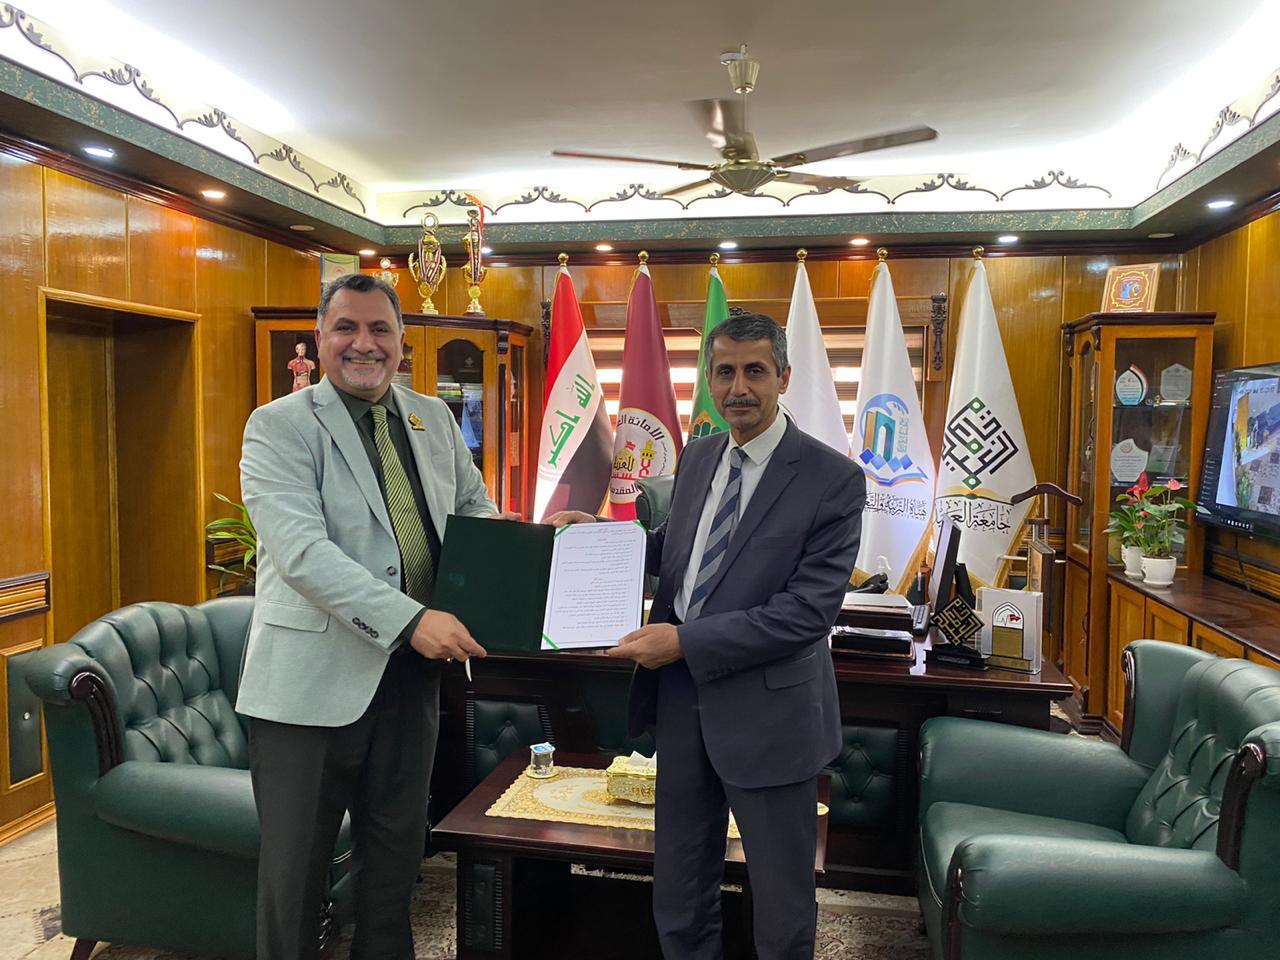 University of Basrah signs a memorandum of cooperation with the Dean University in the holy Karbala .